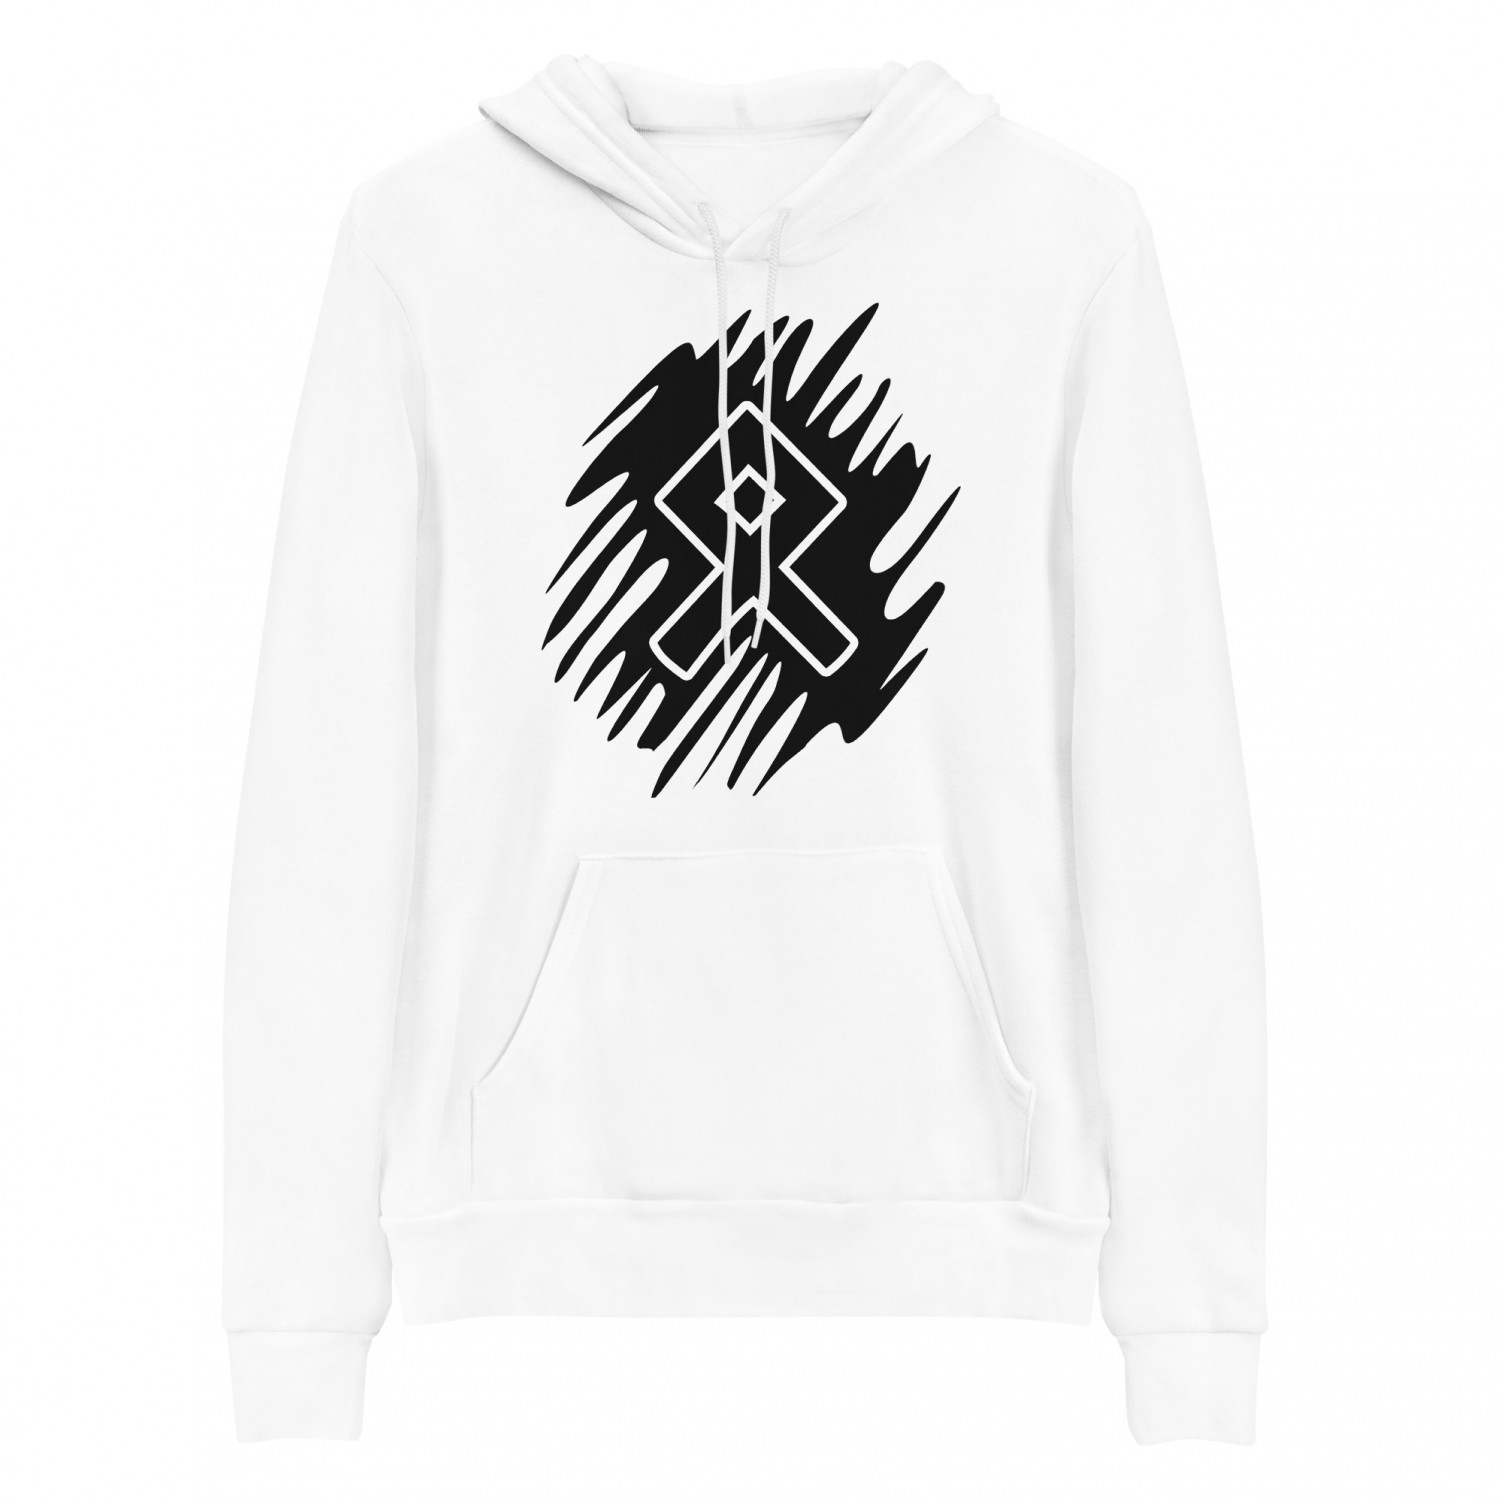 Rune Odal (family protection) print hoodie